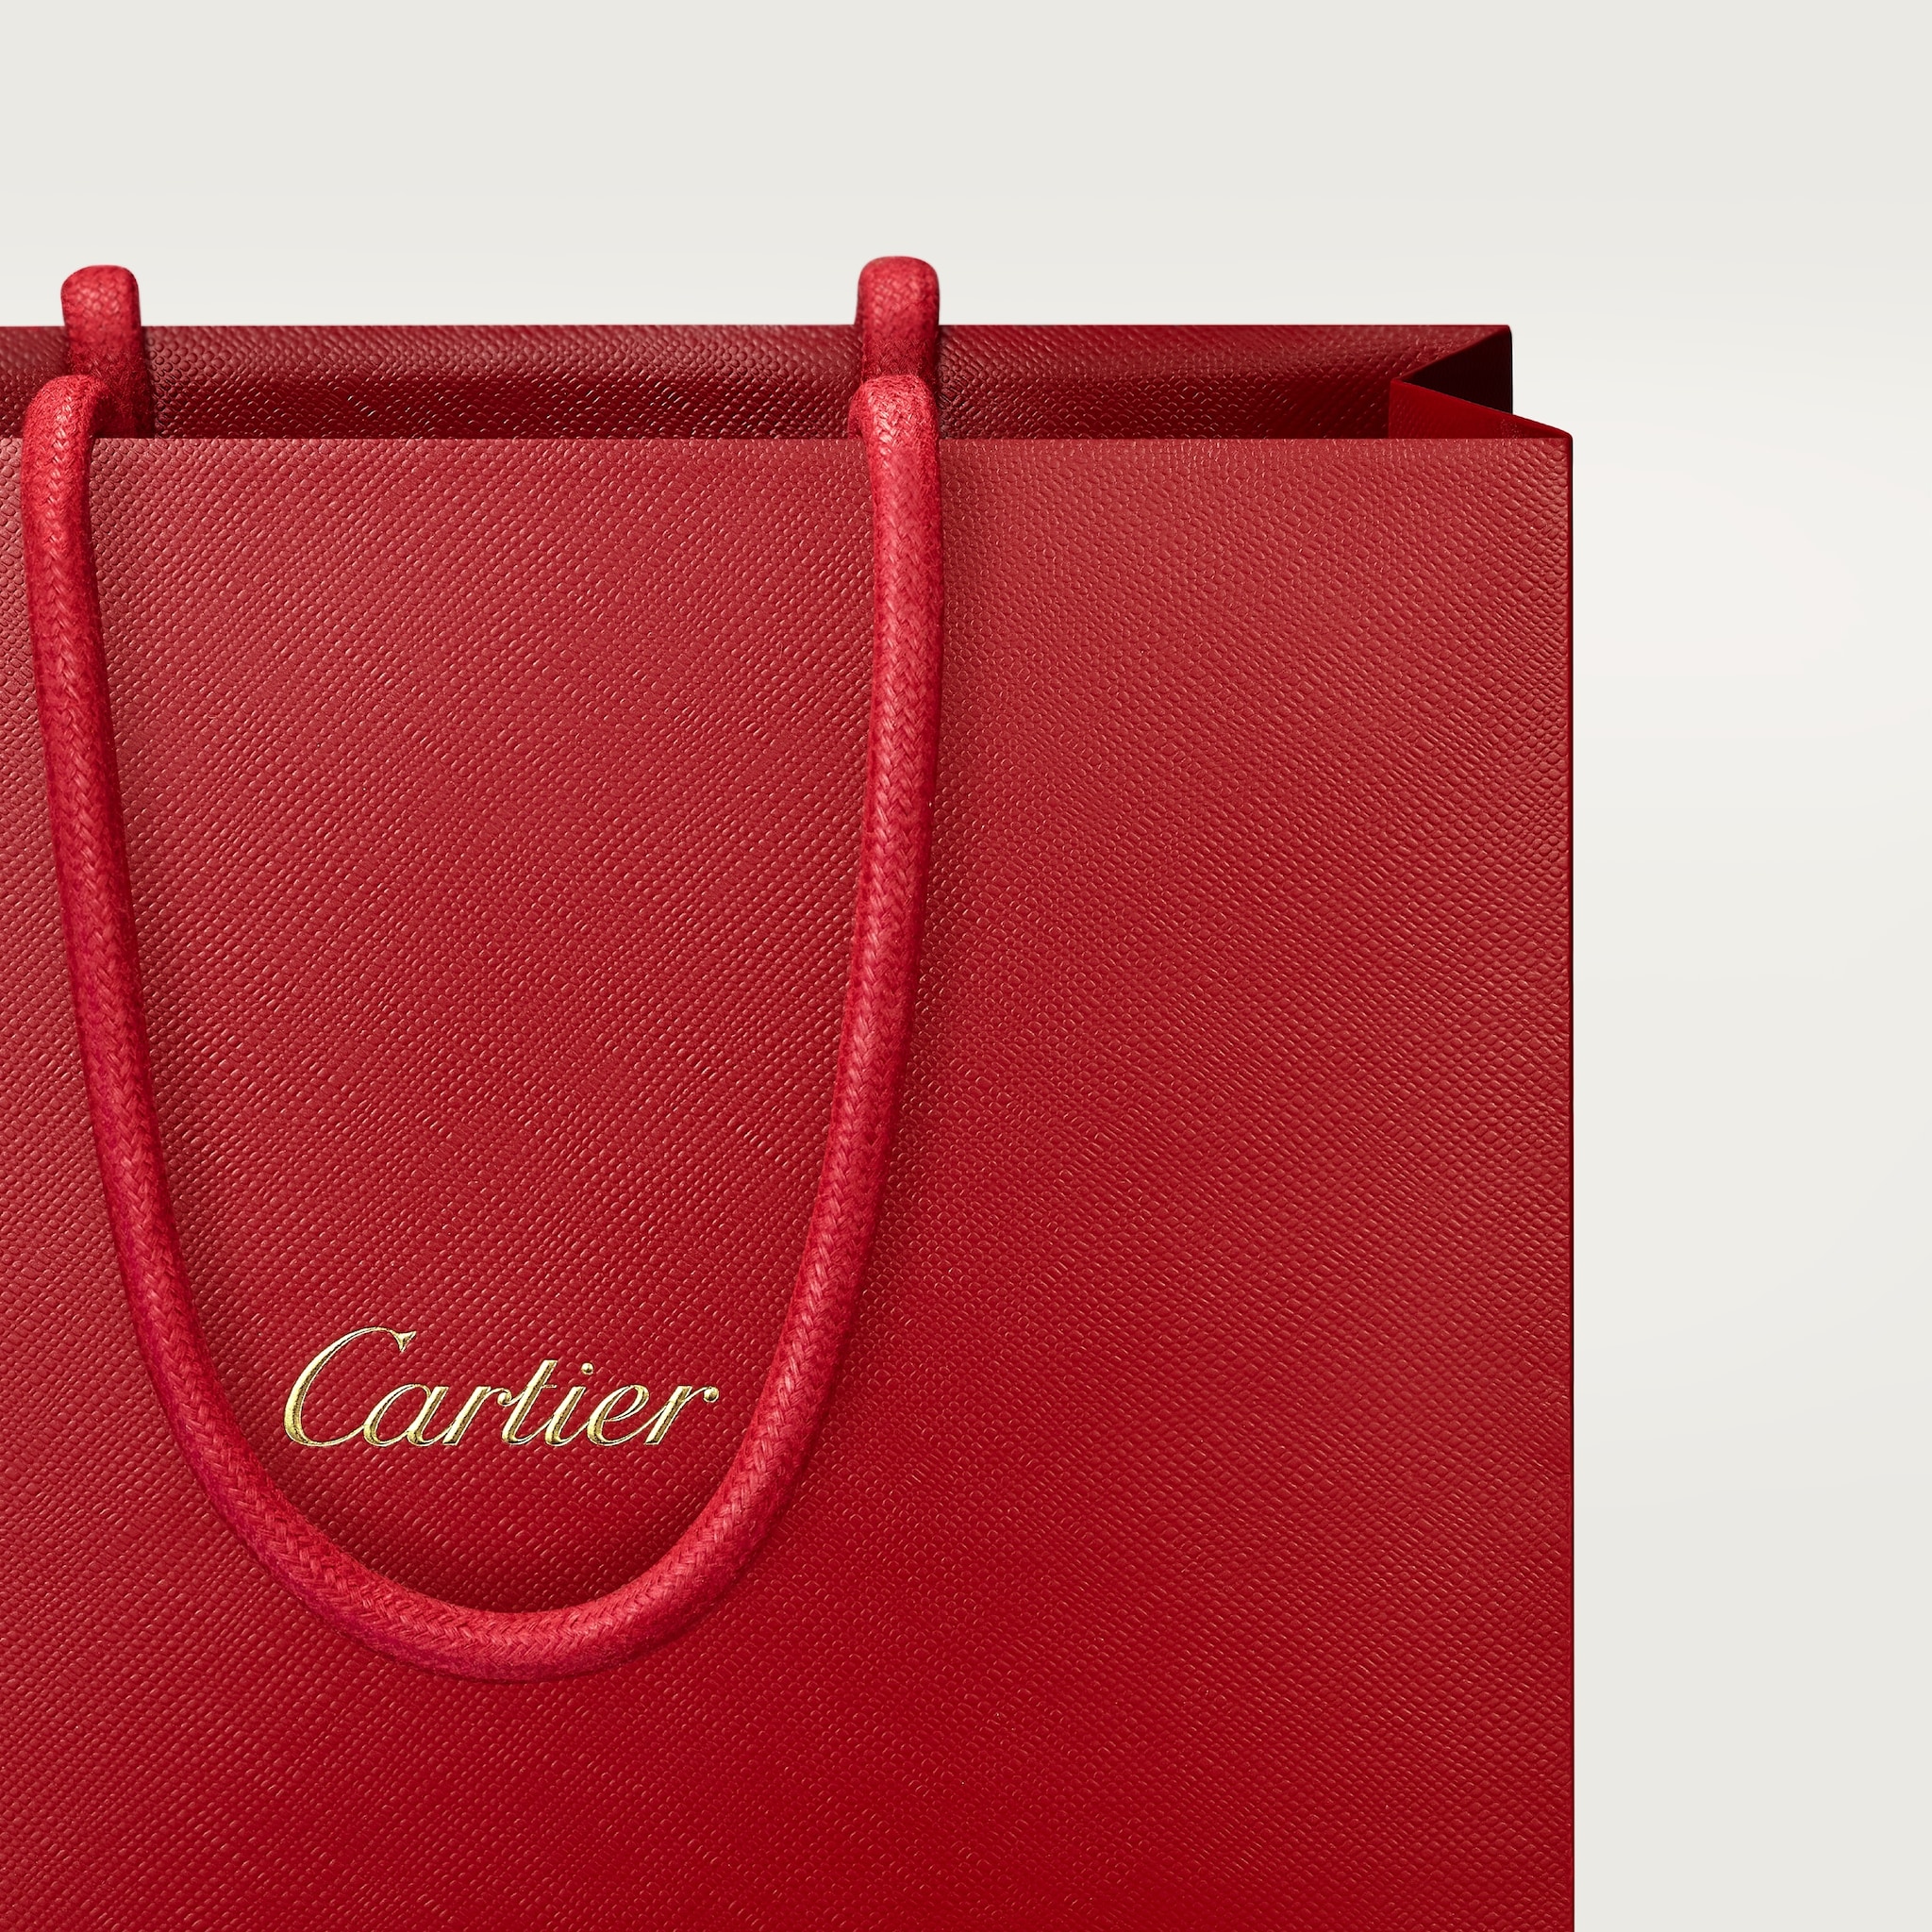 Cartier Characters beach towelCotton